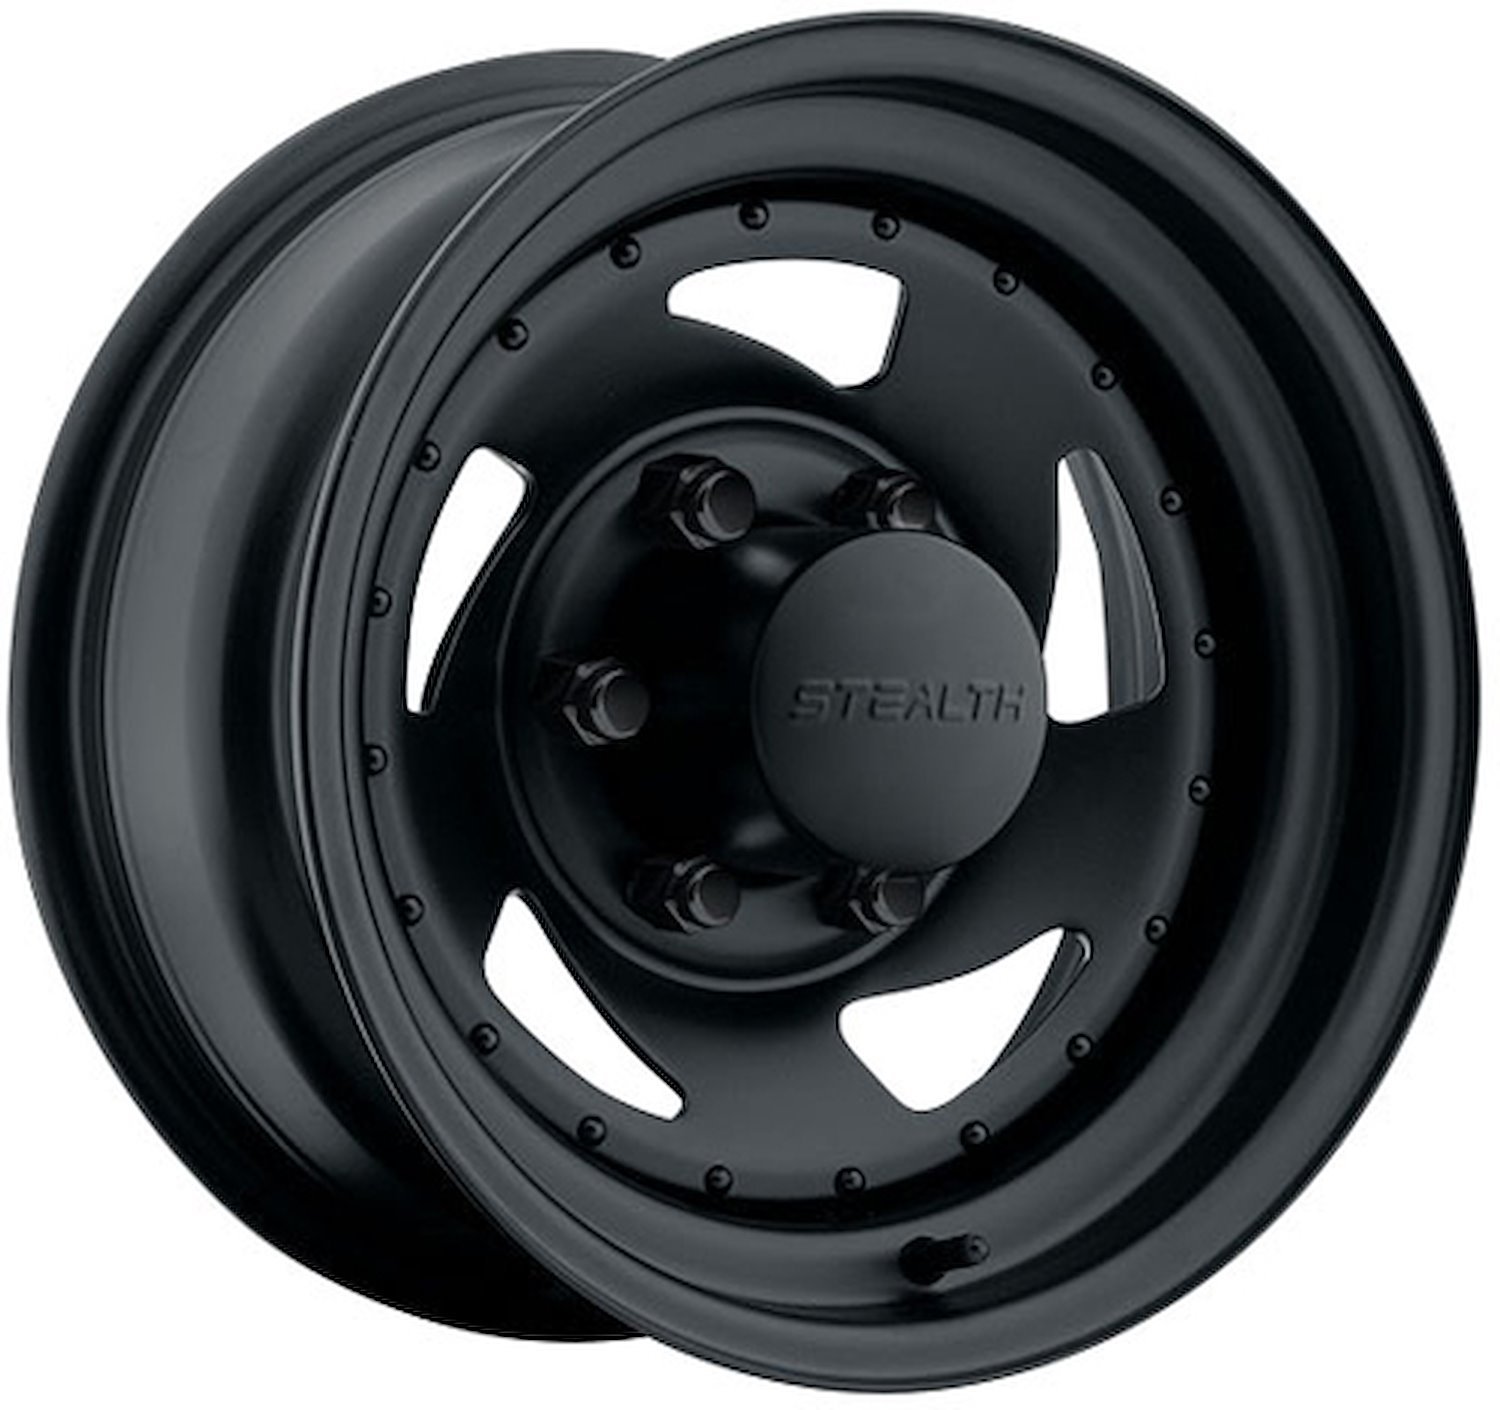 STEALTH BLACK BLADE 15 x 12 6 x 55 Bolt Circle 4 Back Spacing 63 offset 428 Center Bore 1400 lbs Load Rating